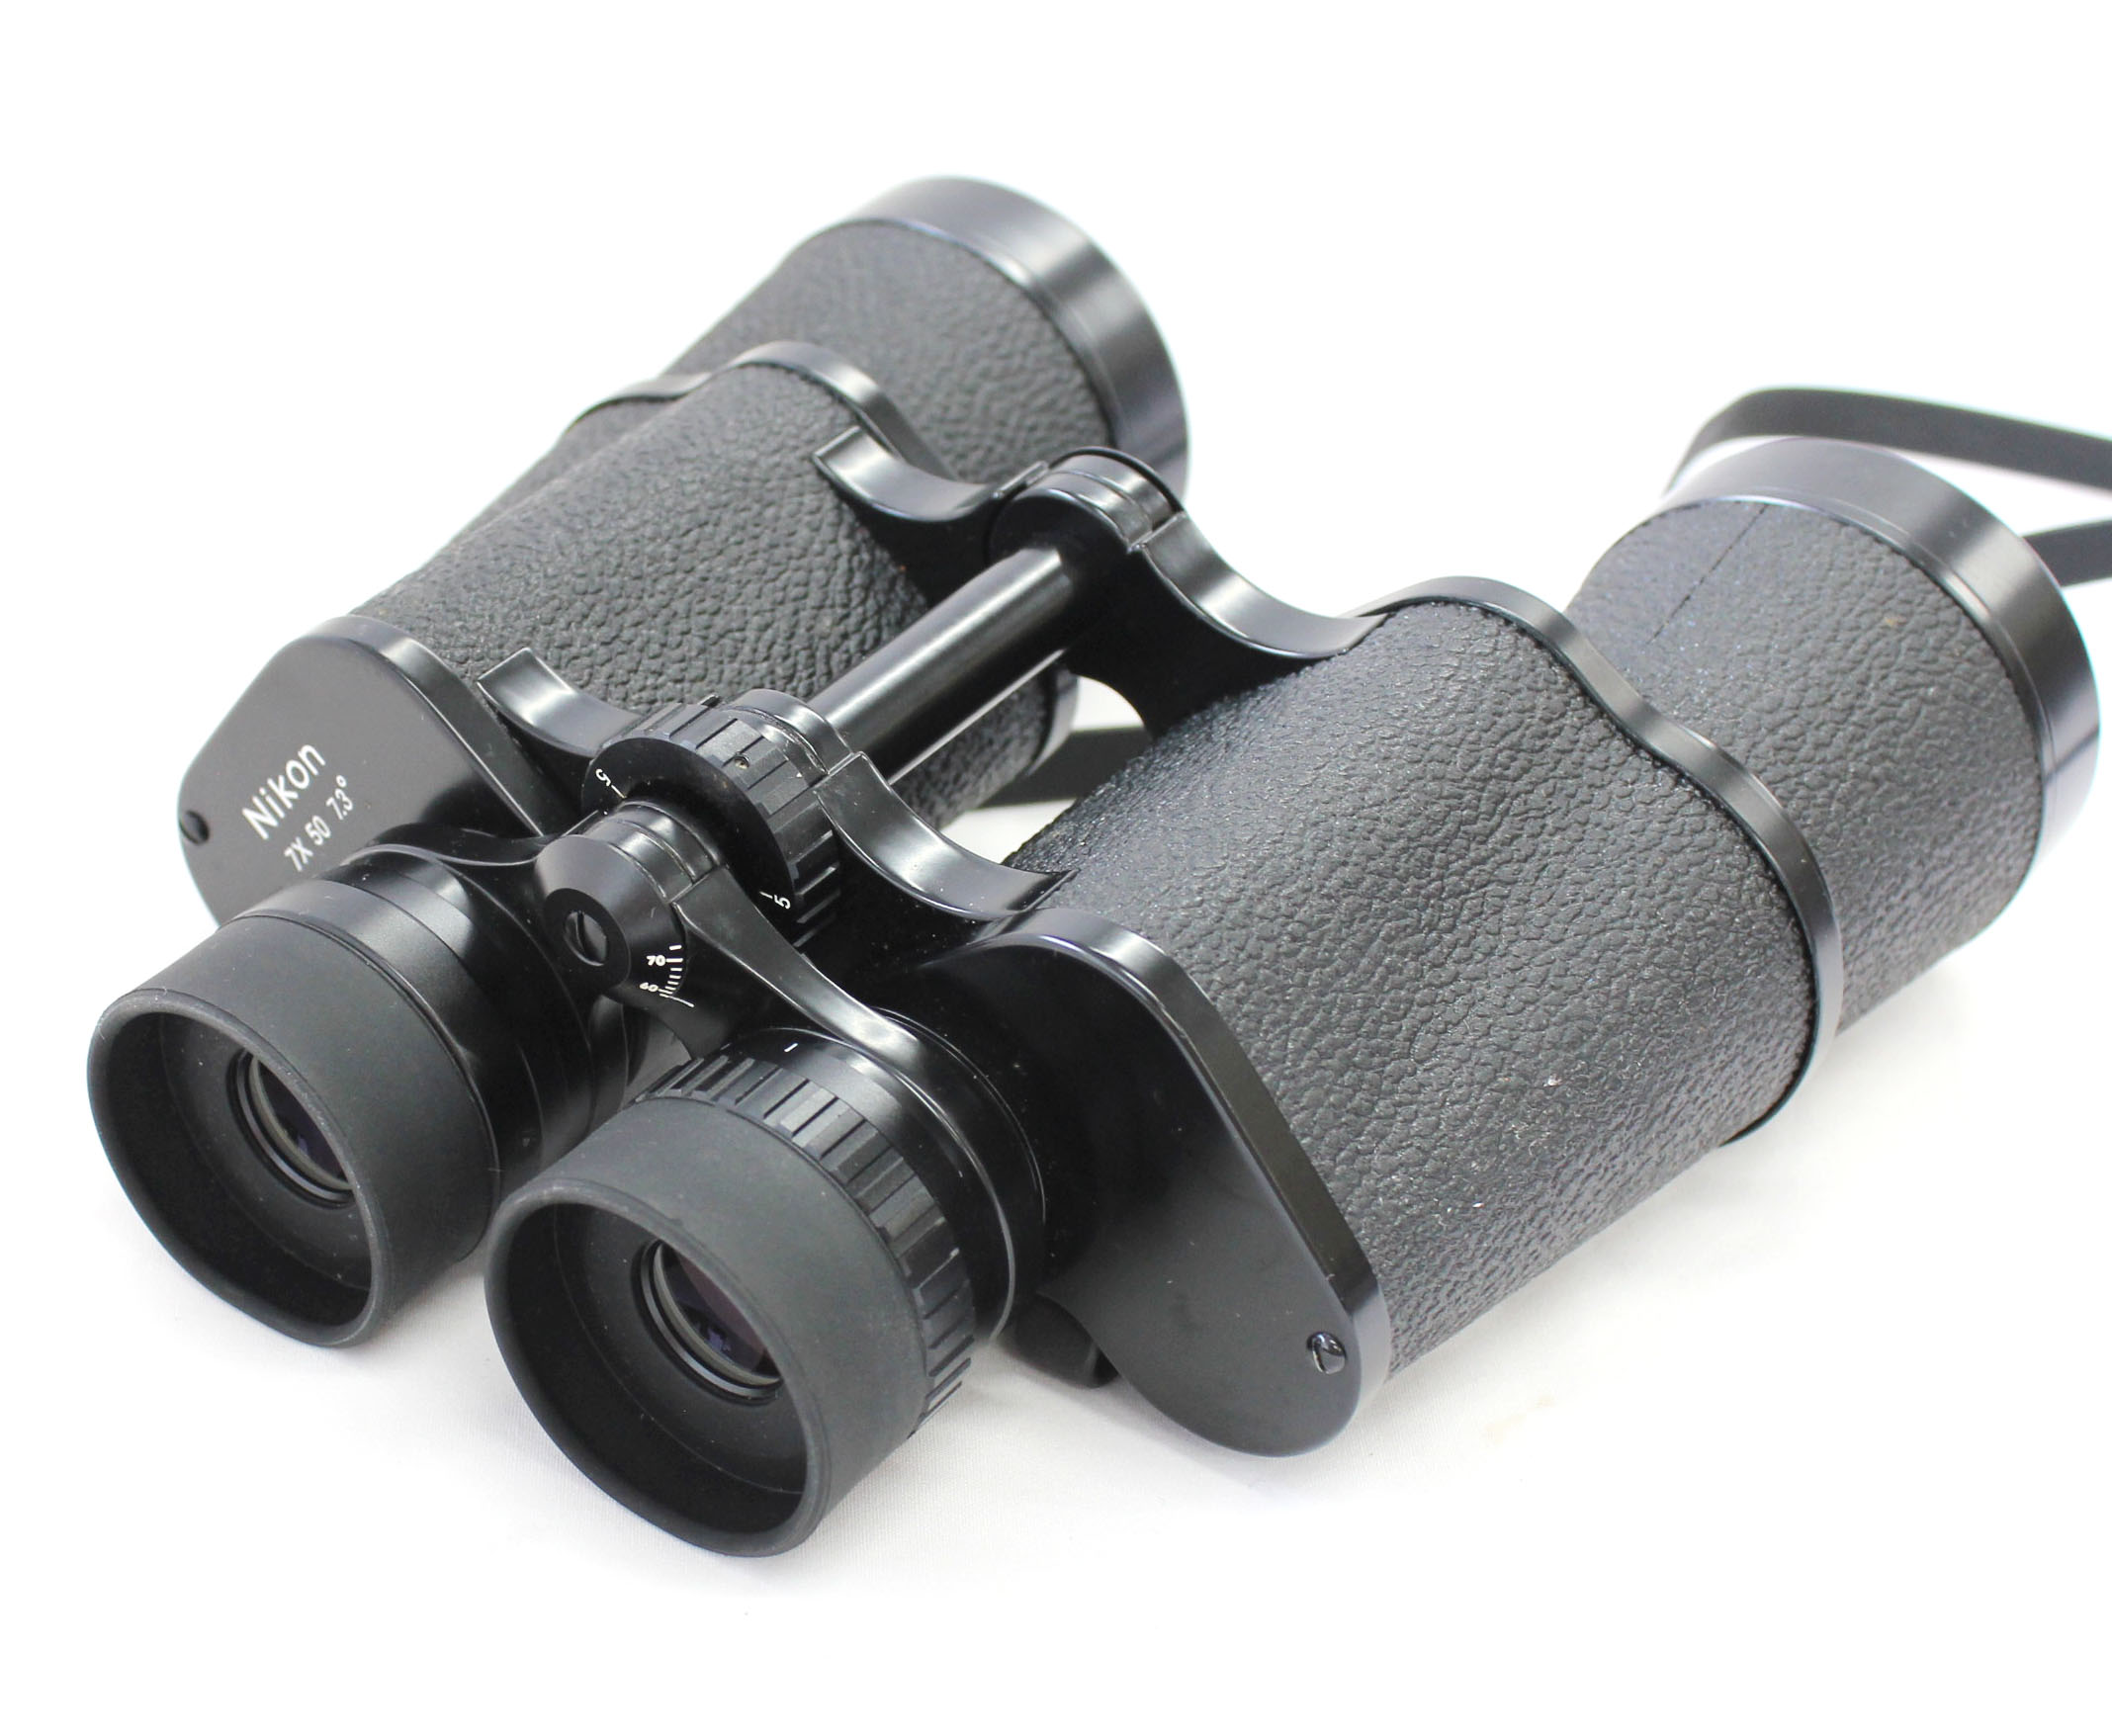  Nikon 7x50 7.3° 7.3 Degree Binoculars with Strap and Case from Japan Photo 7